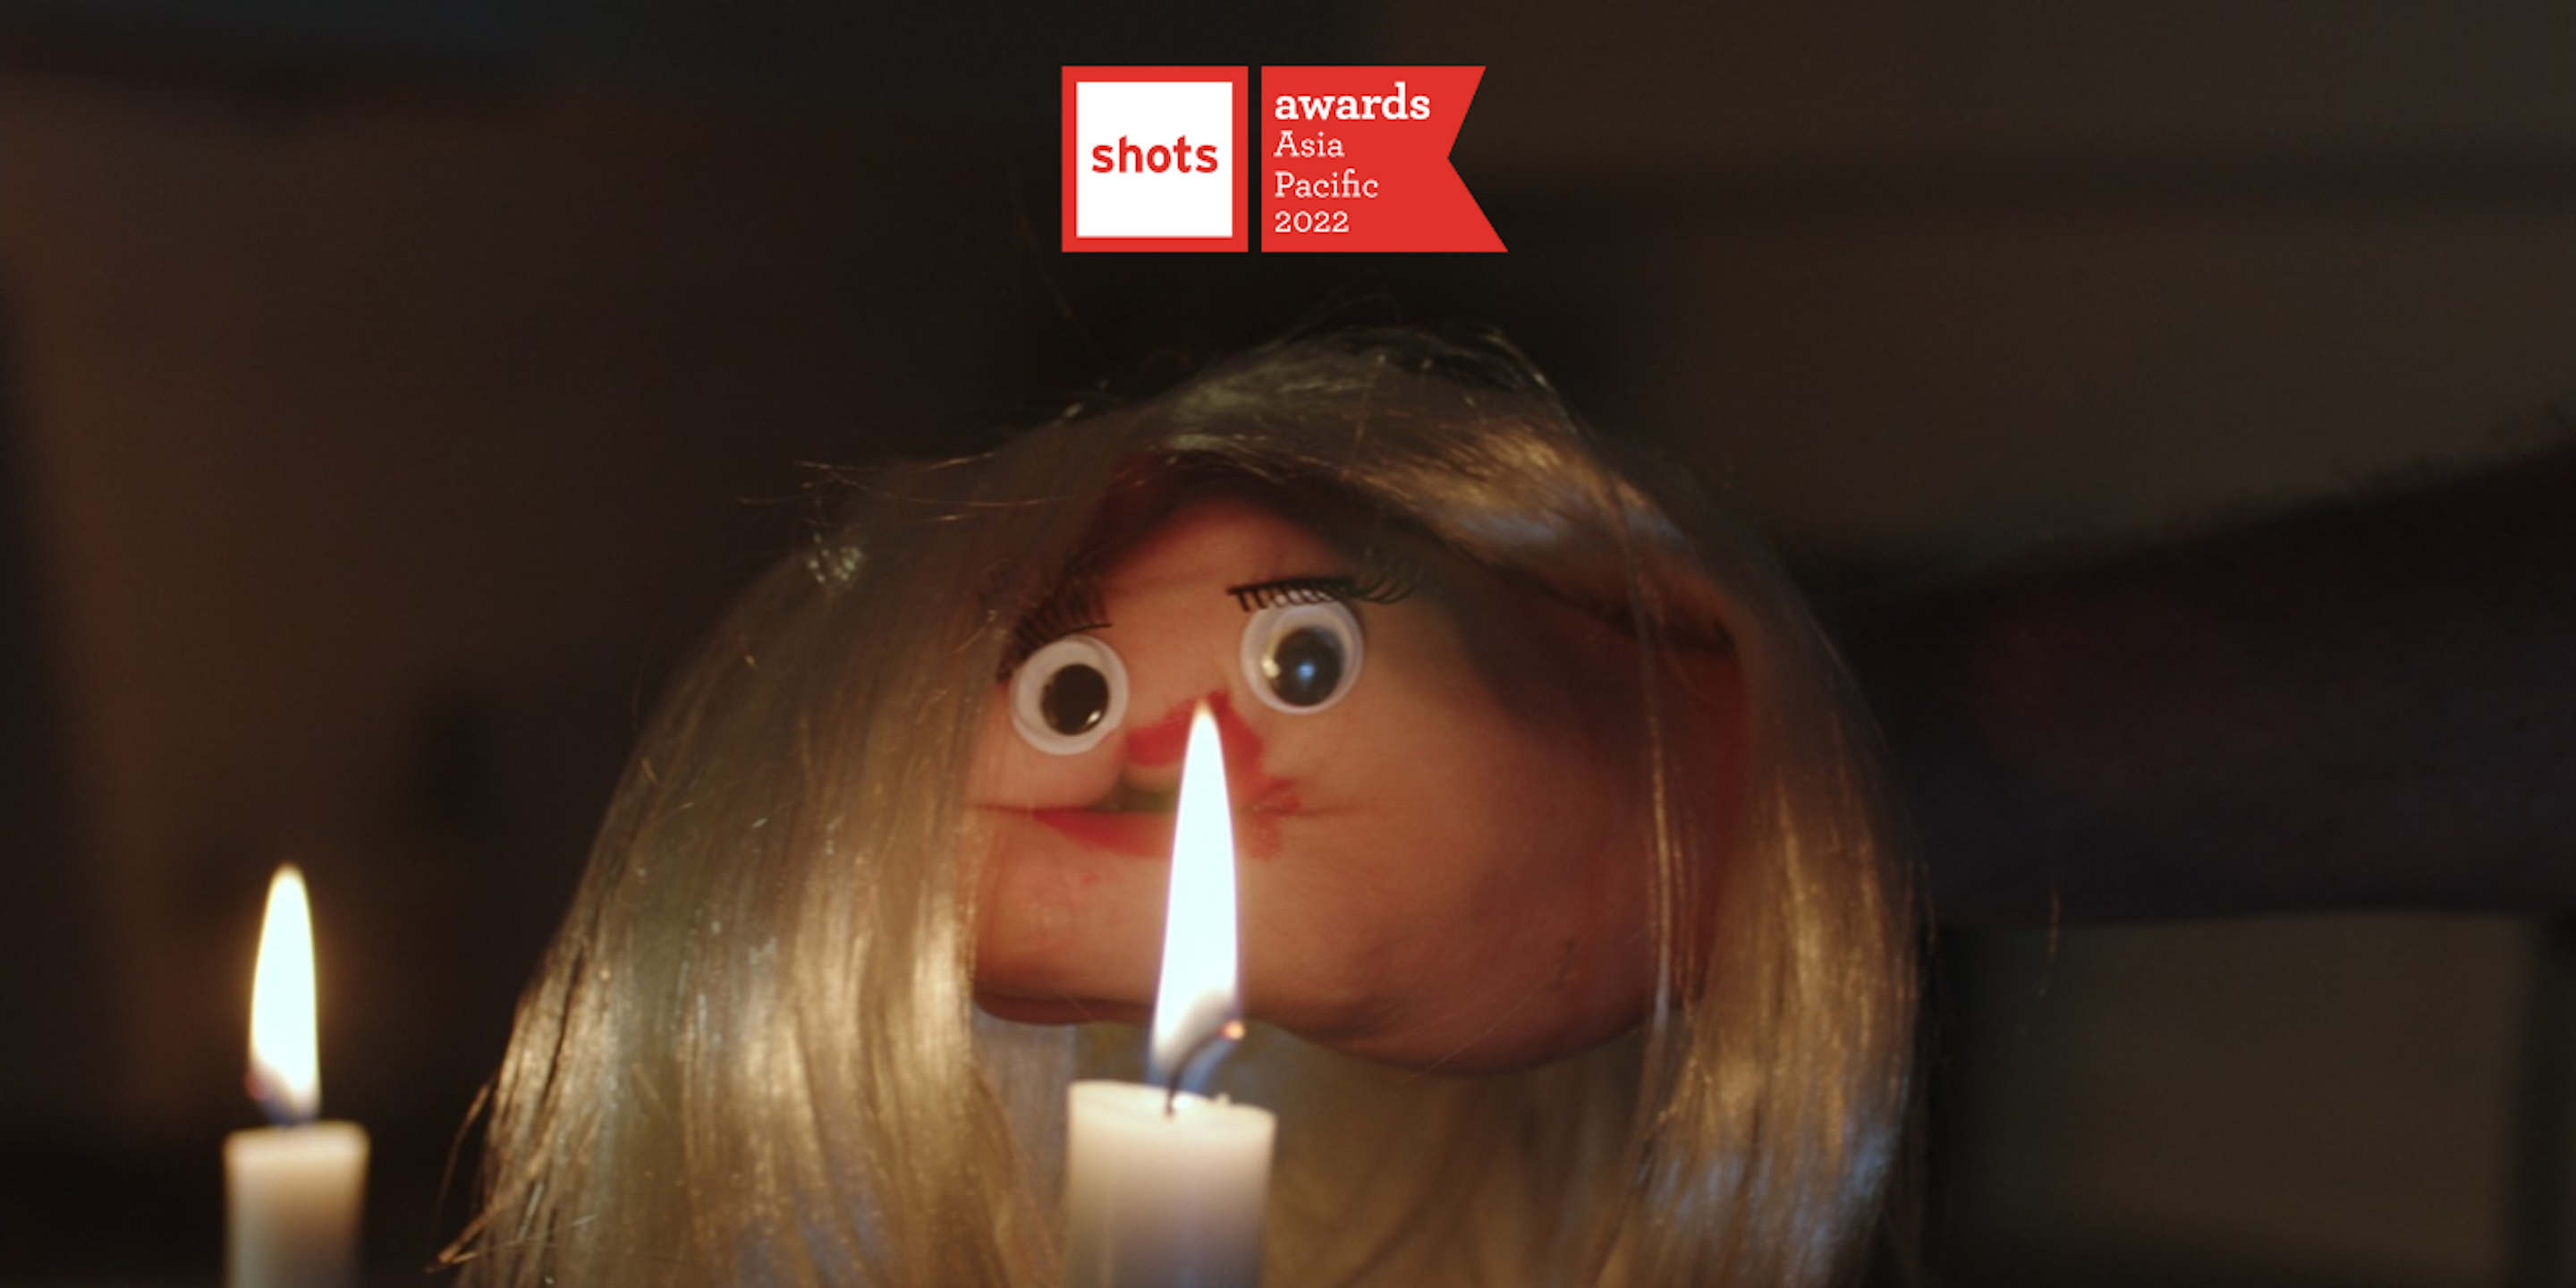 Awards | electriclime°'s Durex film shortlisted at shots Awards Asia Pacific 2022